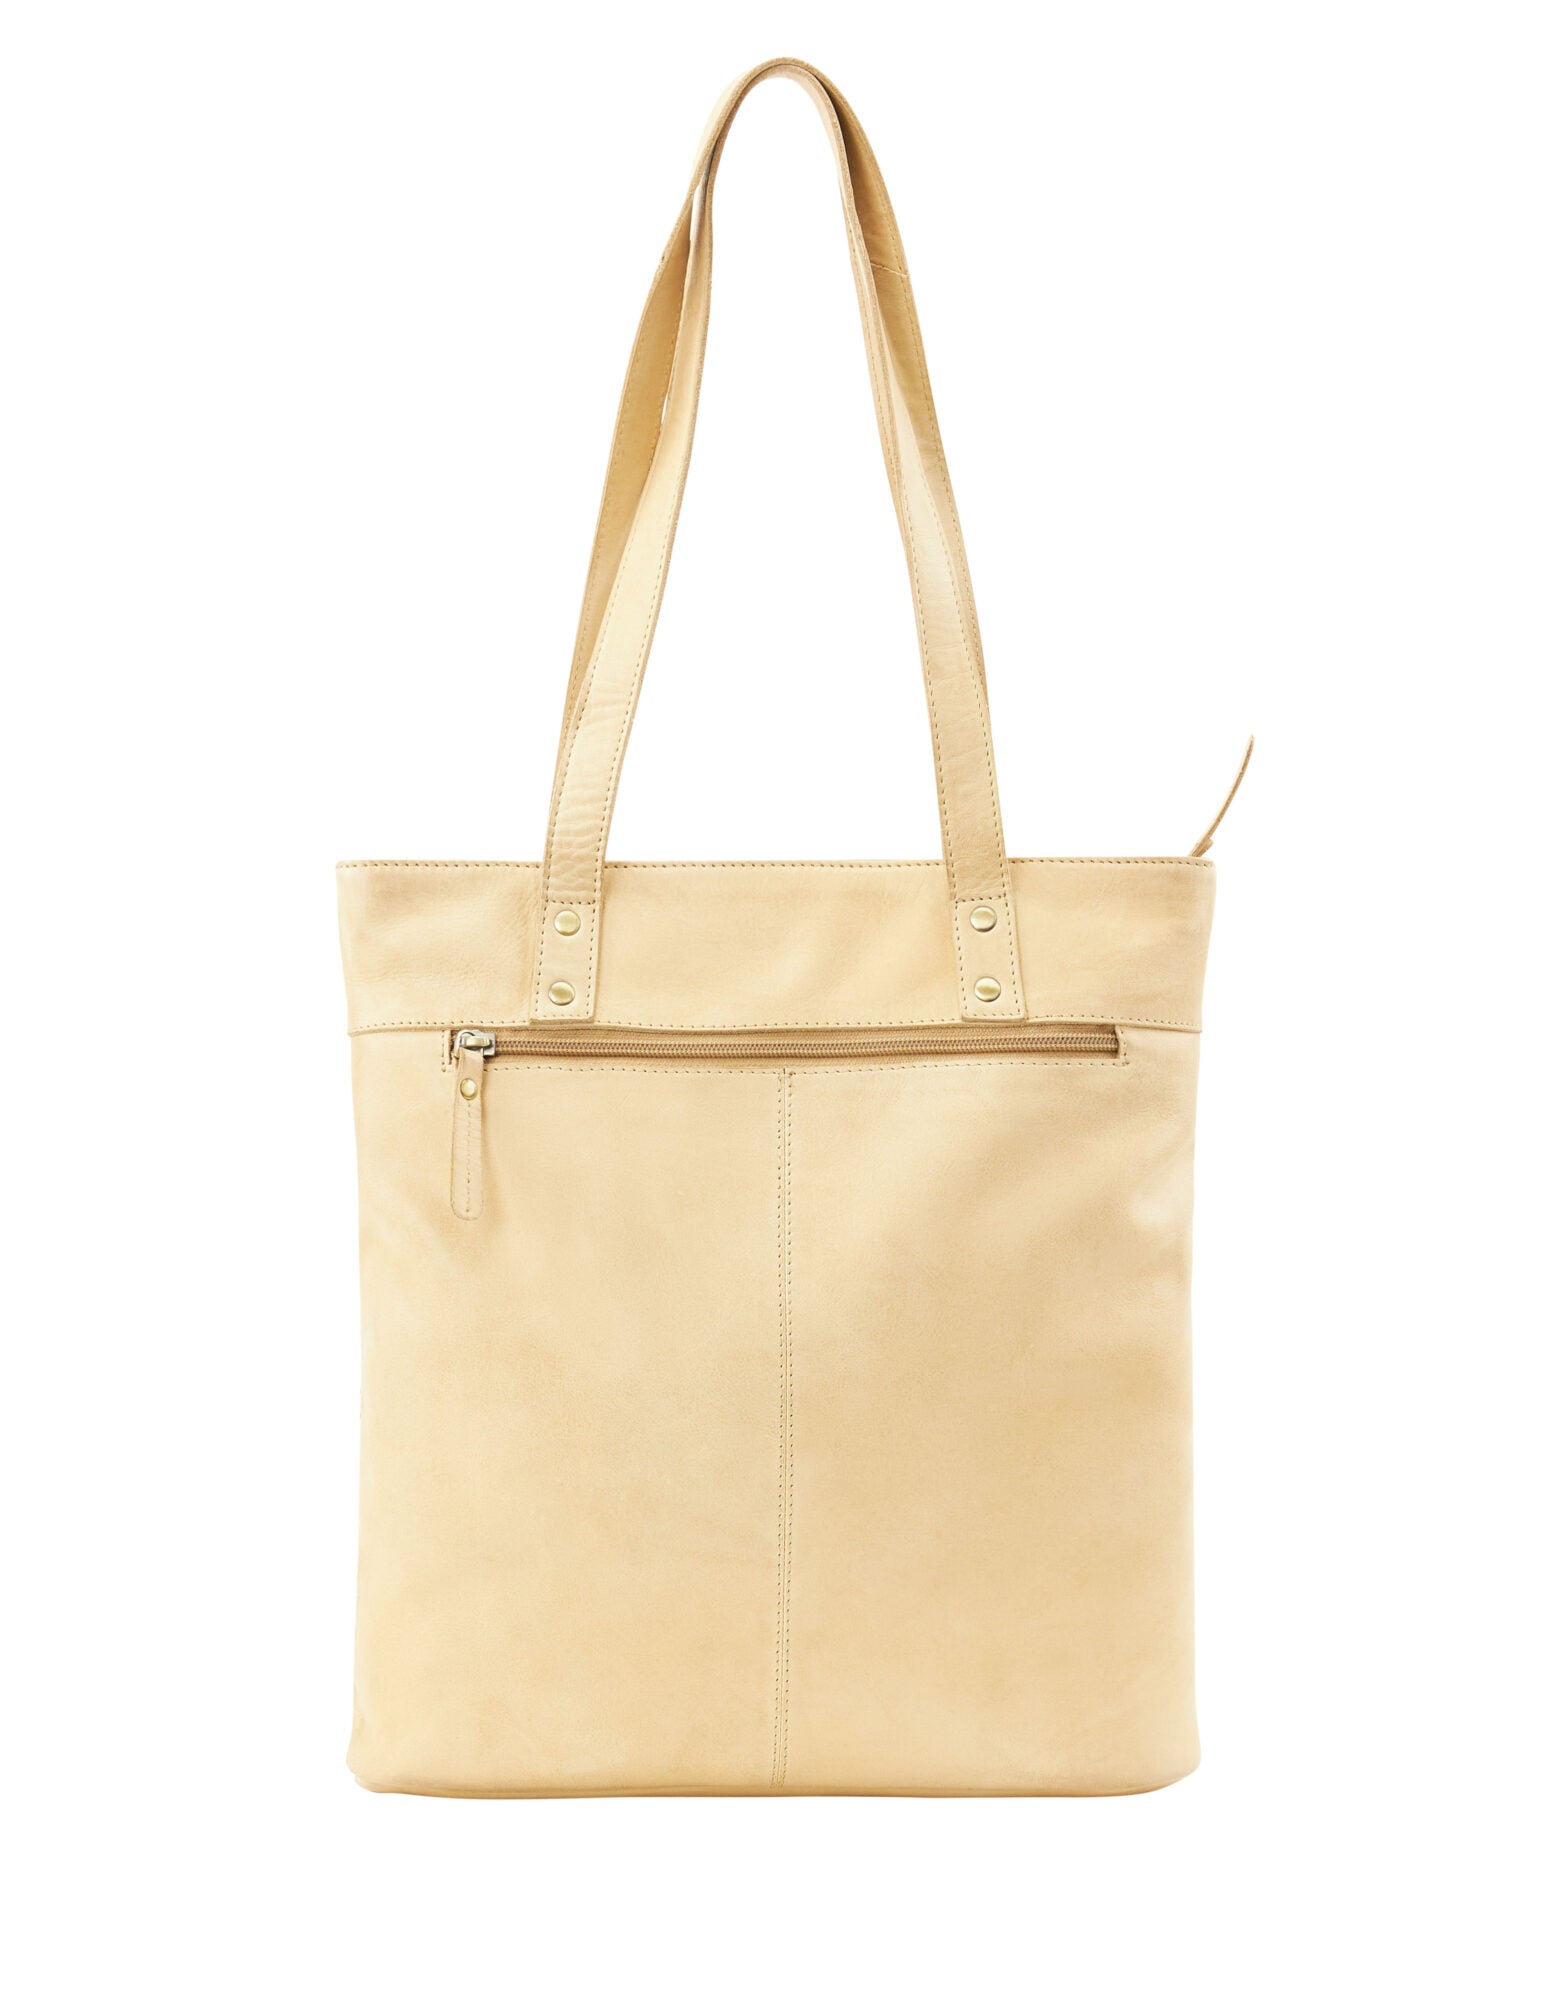 Prairie Luna Leather Tote - The Luggage Place